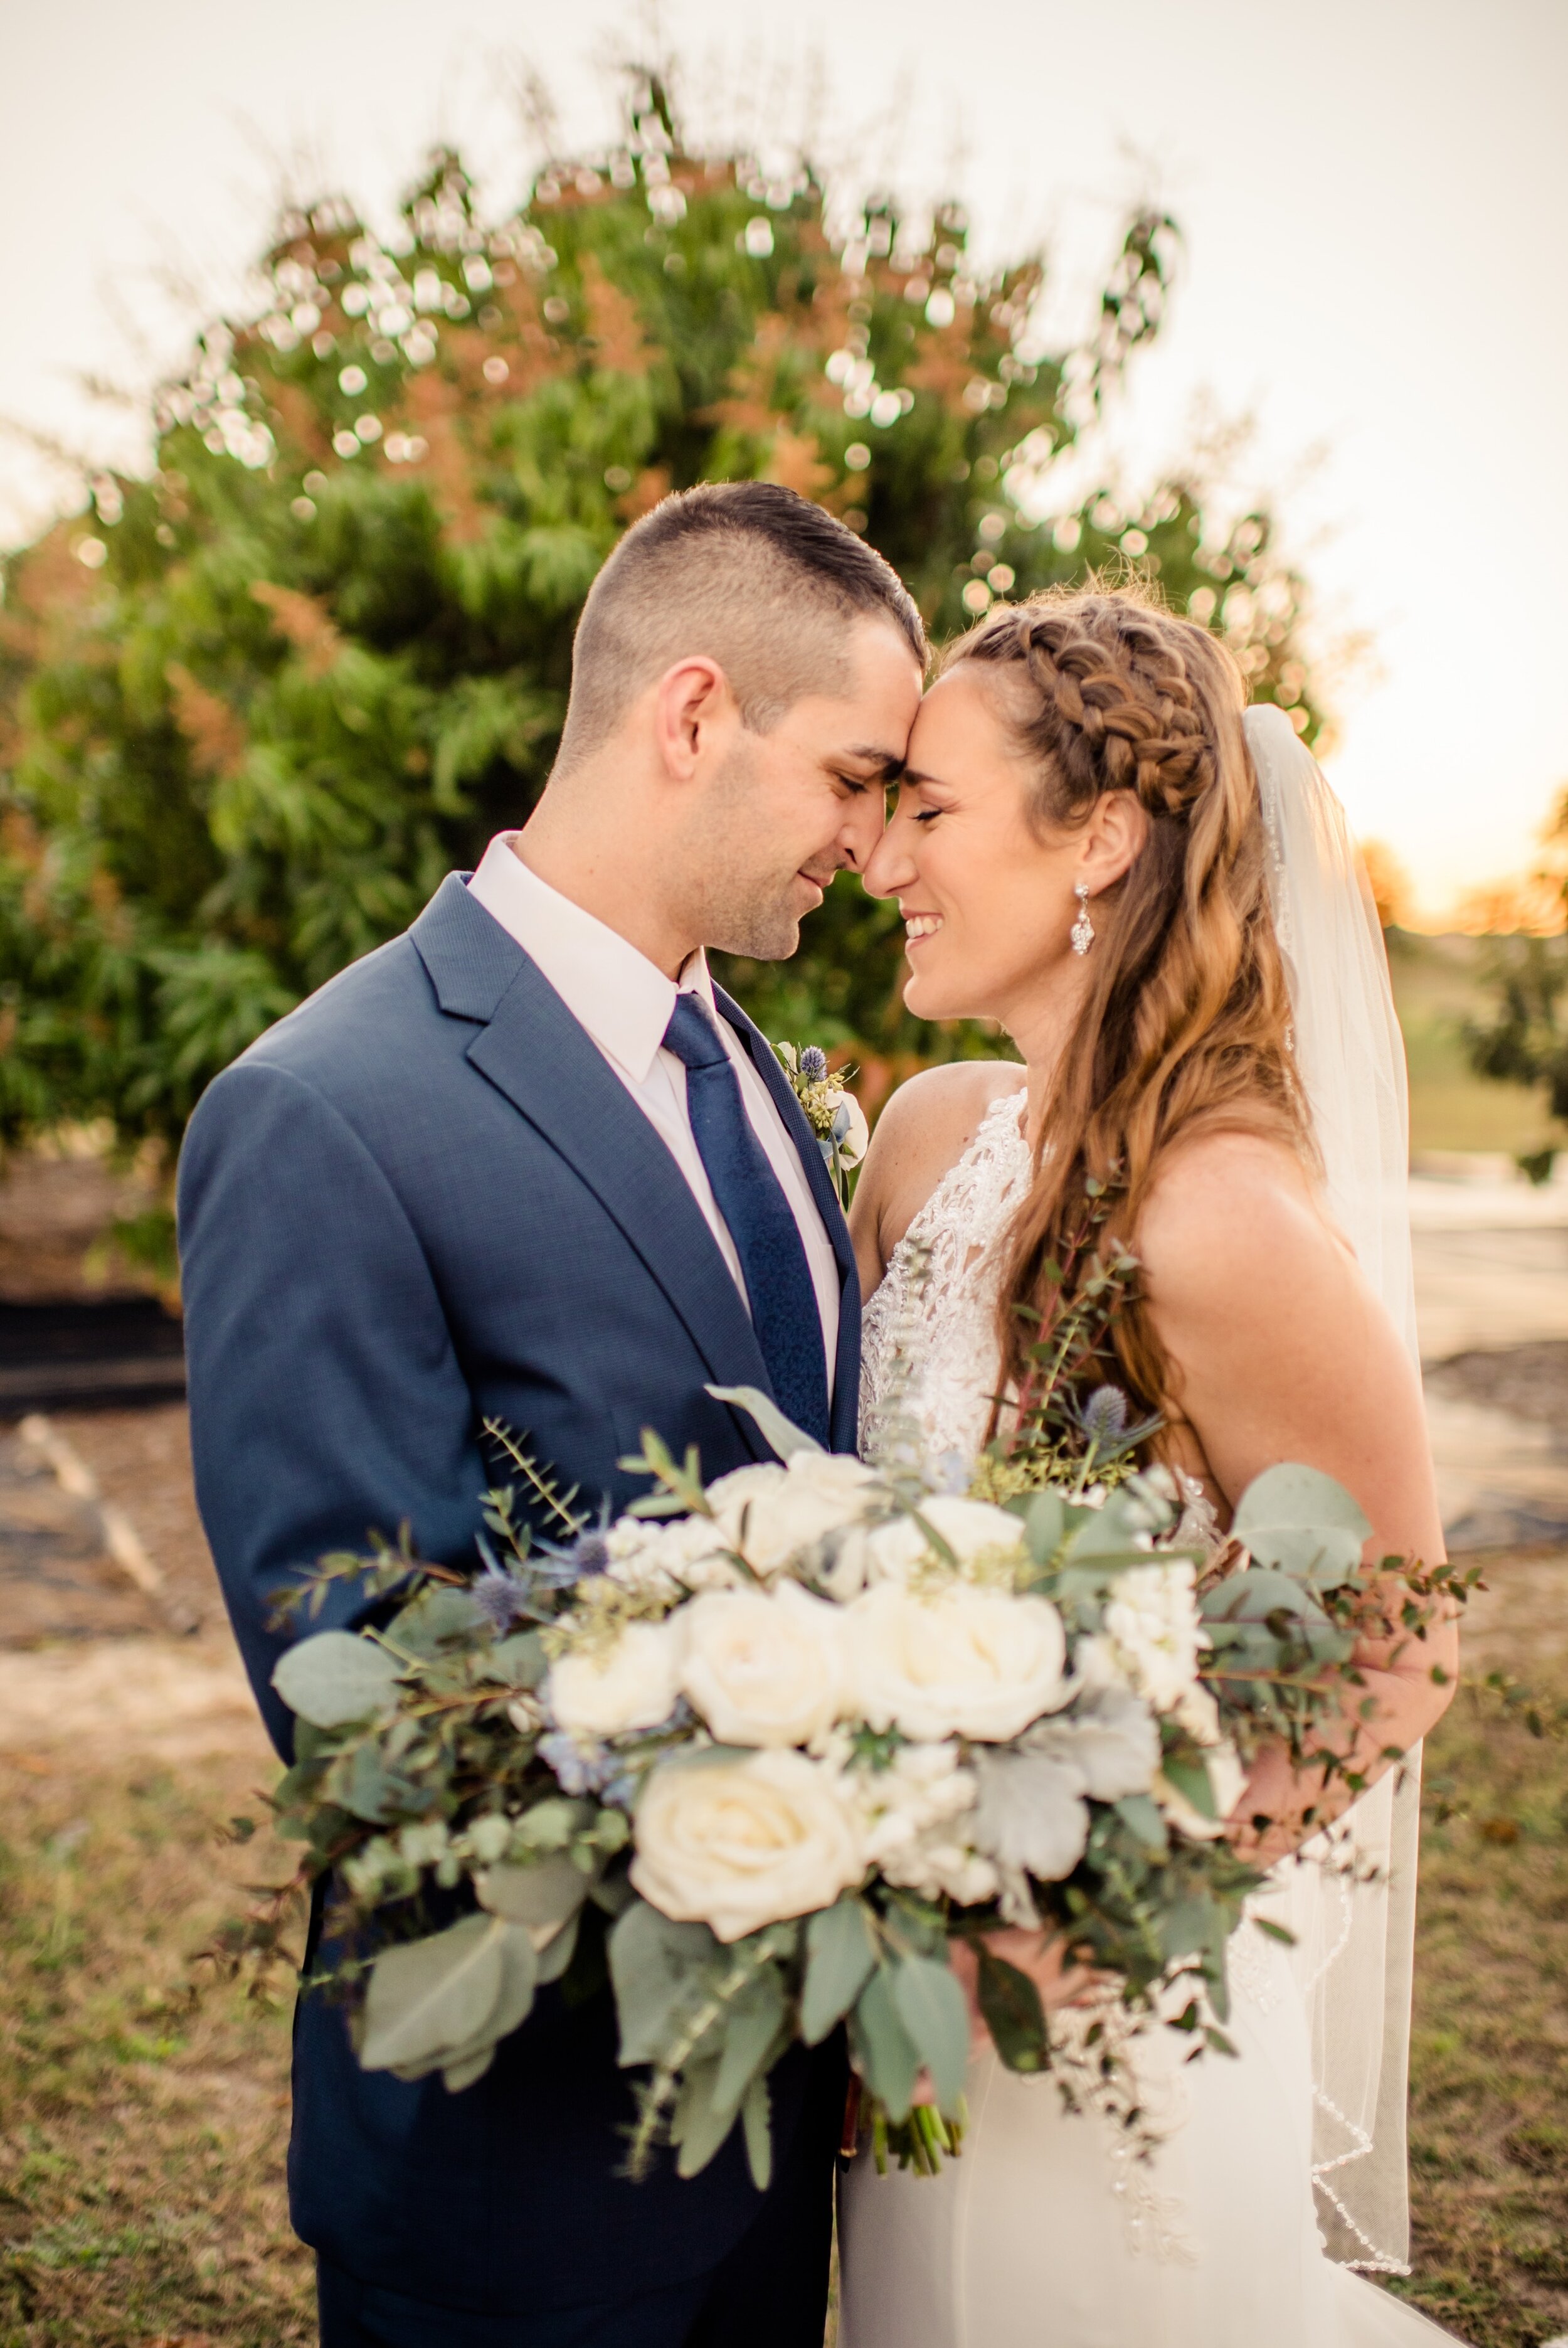 Stunning photo of bride and groom featuring bridal bouquet